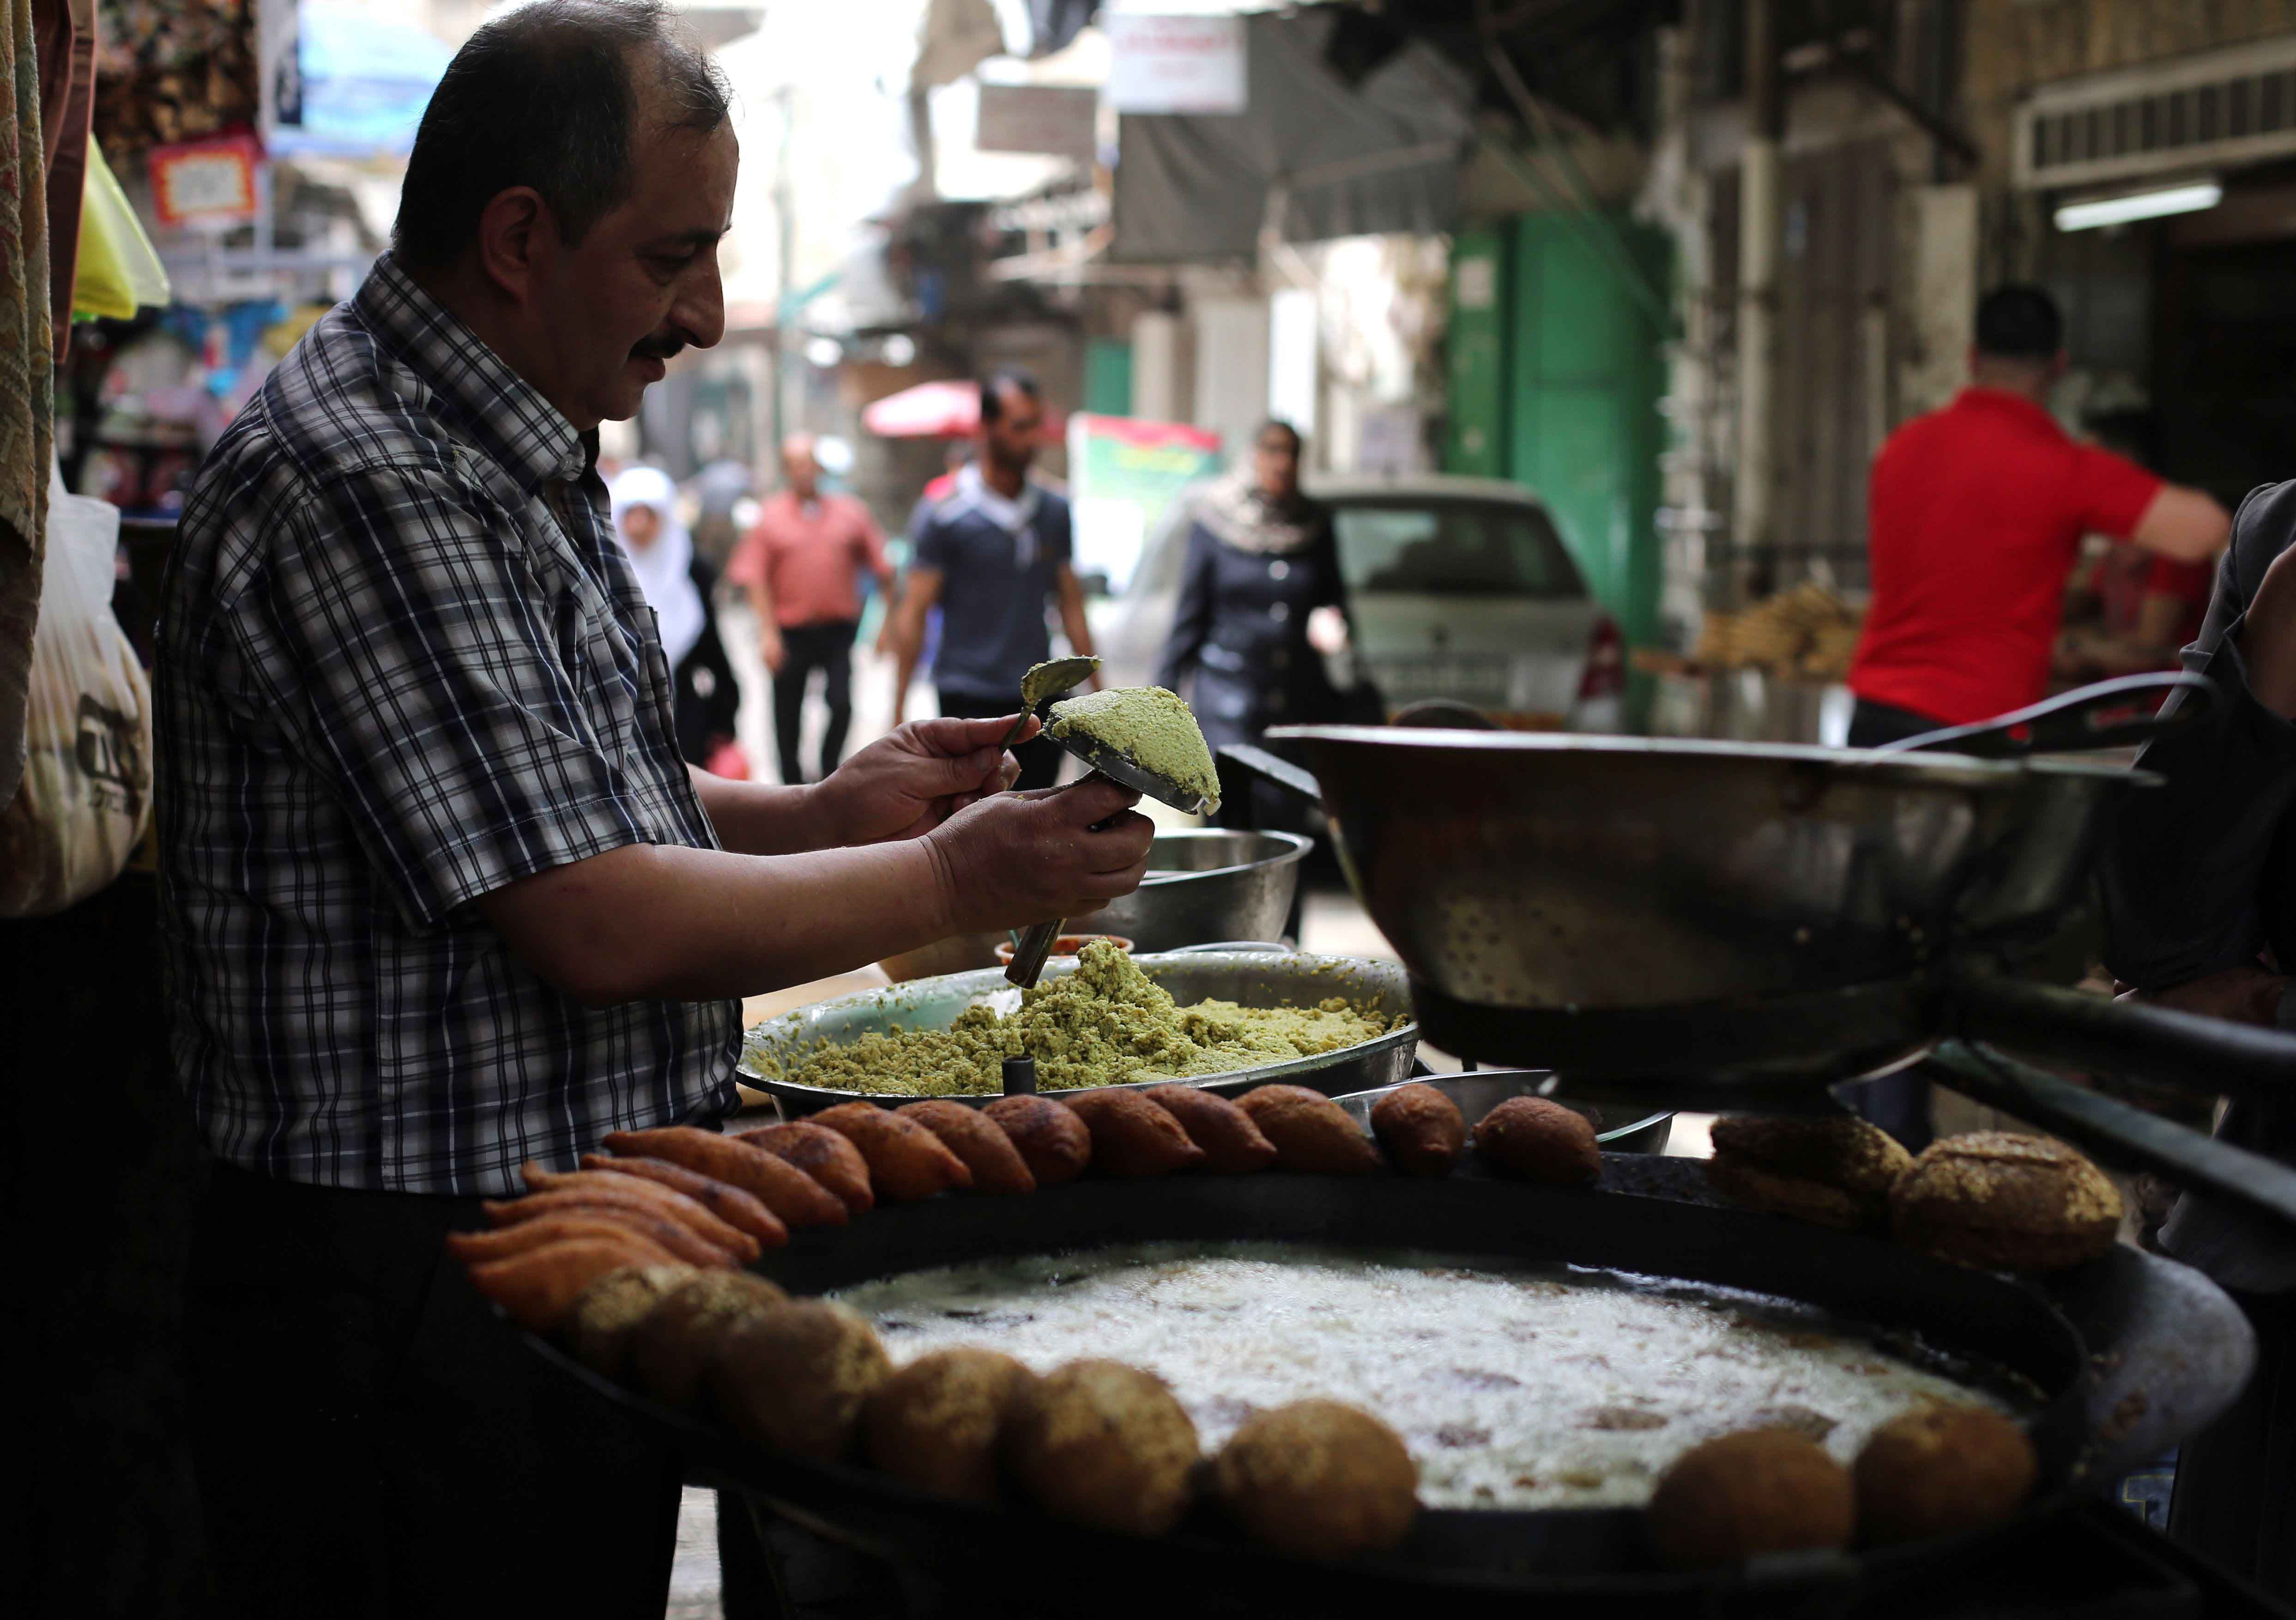 More than what’s on a plate. A Palestinian man makes falafel, a traditional dish consisting of fried chickpeas, on a street in Nablus